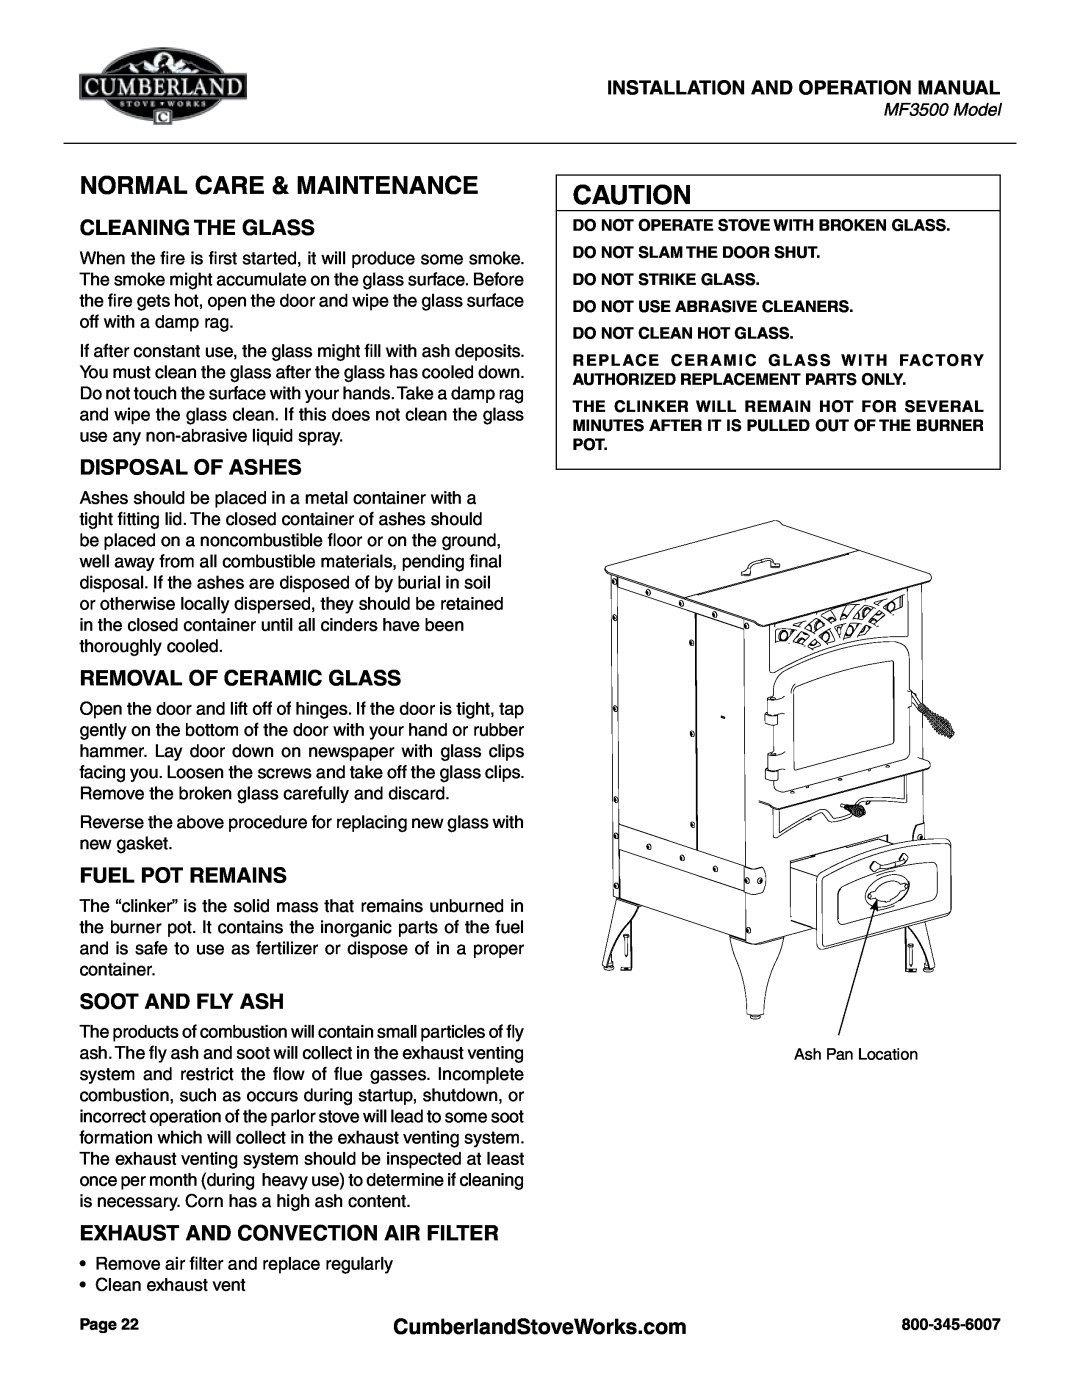 Cumberland Stove Works MF3500 operation manual Cleaning The Glass, Disposal Of Ashes, Removal Of Ceramic Glass 